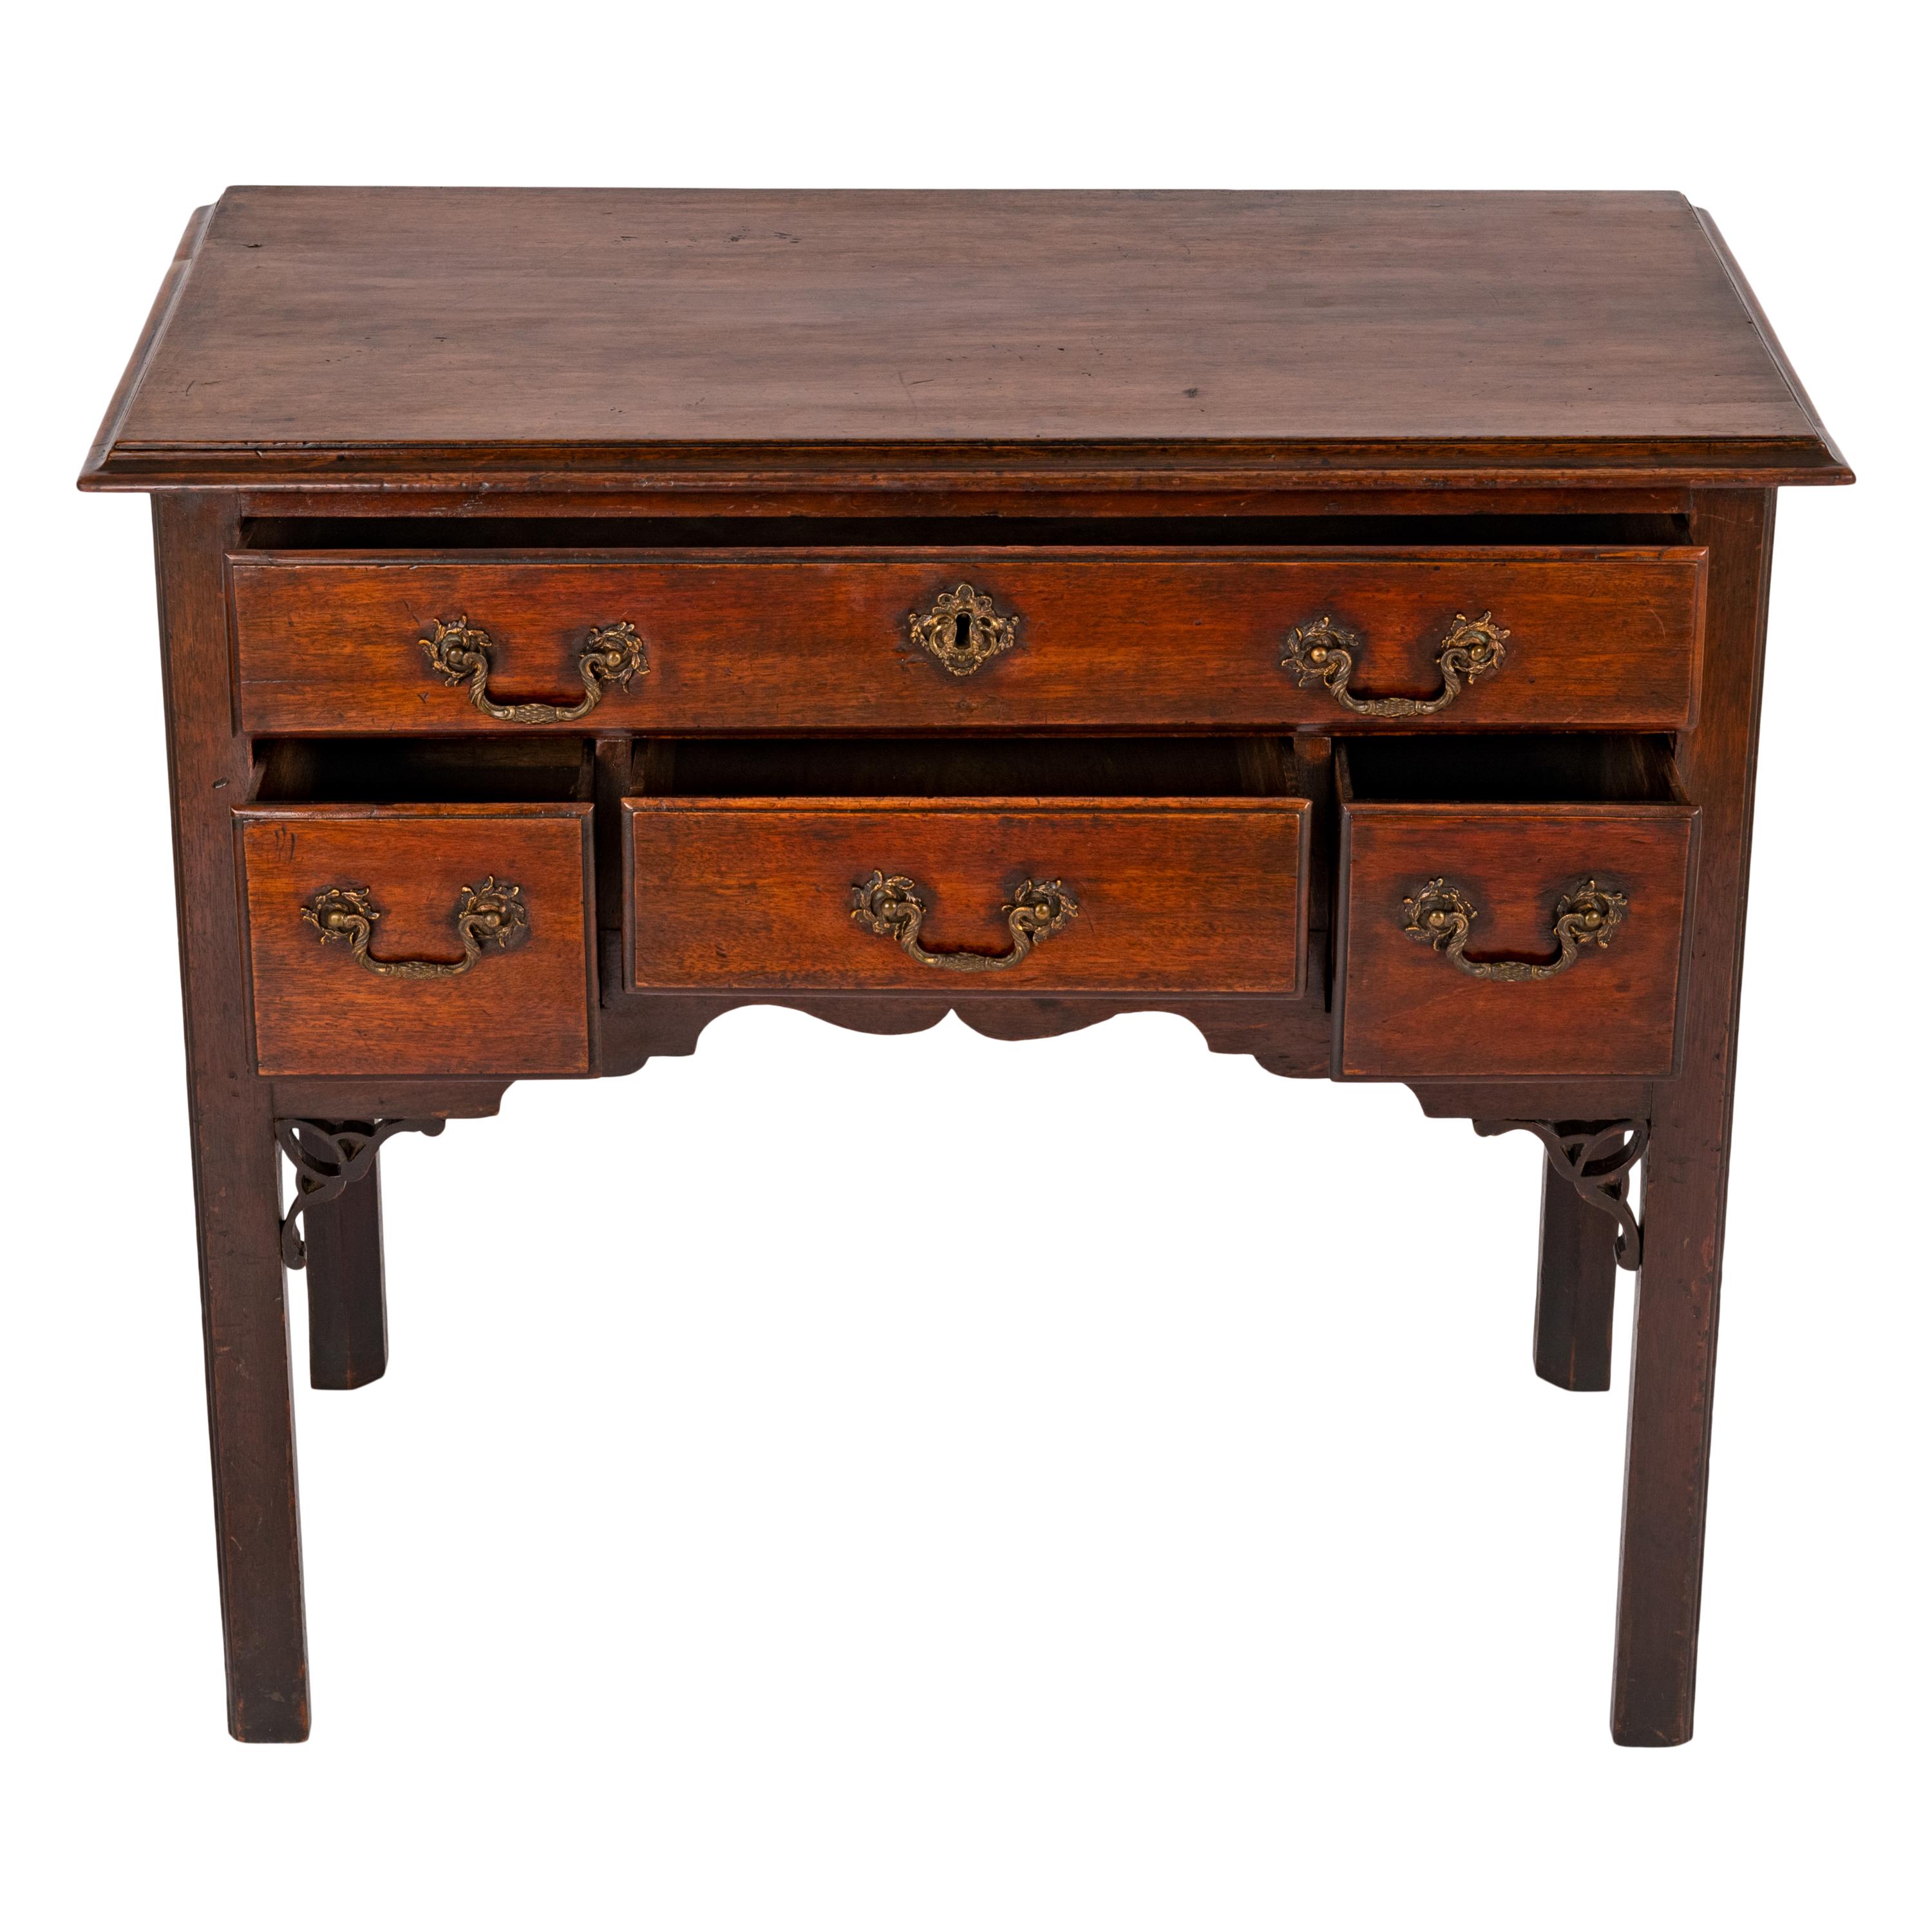 Antique English 18th C Georgian Mahogany Chippendale Lowboy Side Table 1750 For Sale 4